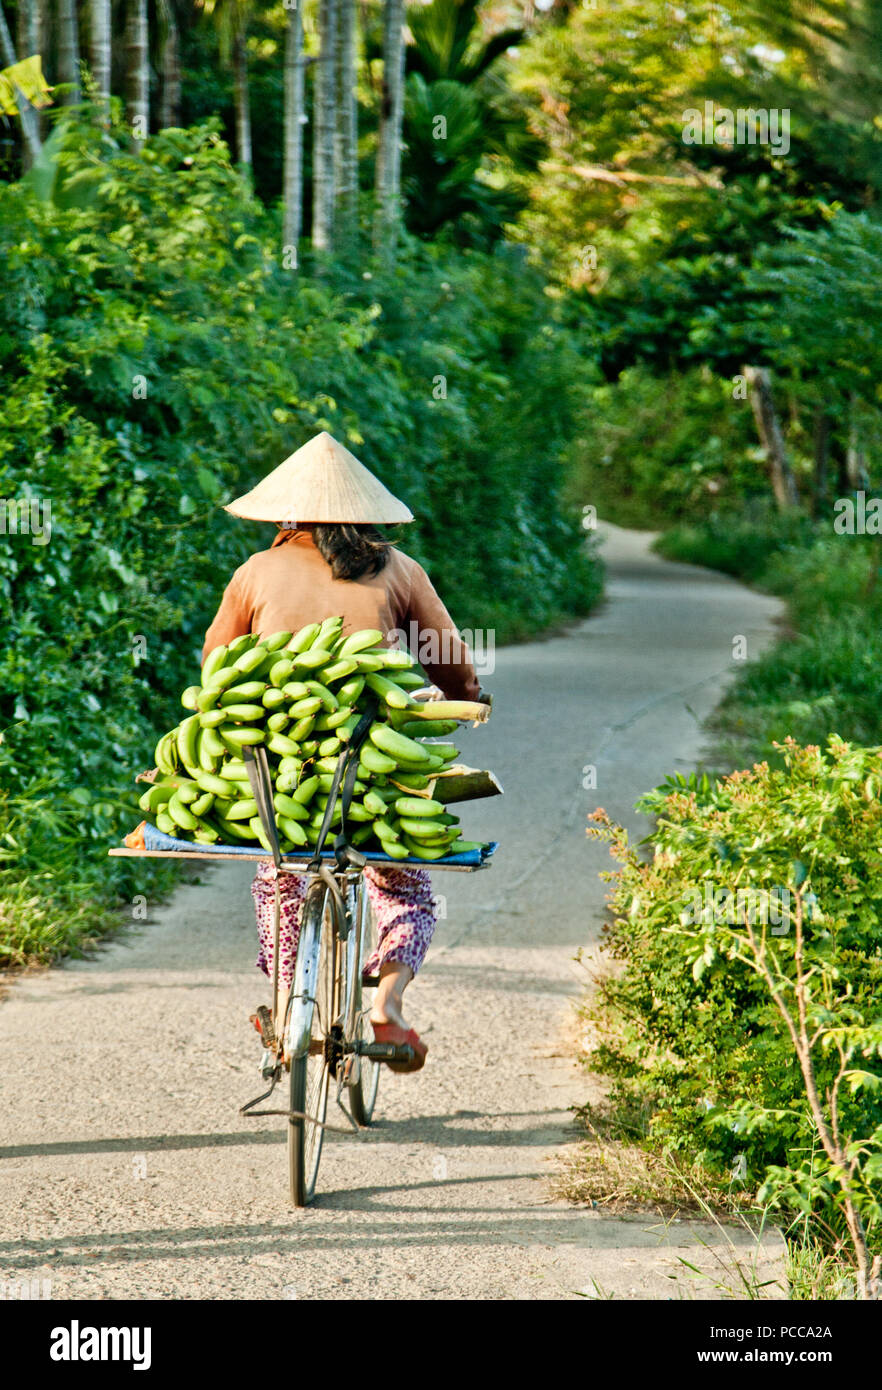 A Vietnamese woman rides a bicycle loaded with bananas Stock Photo